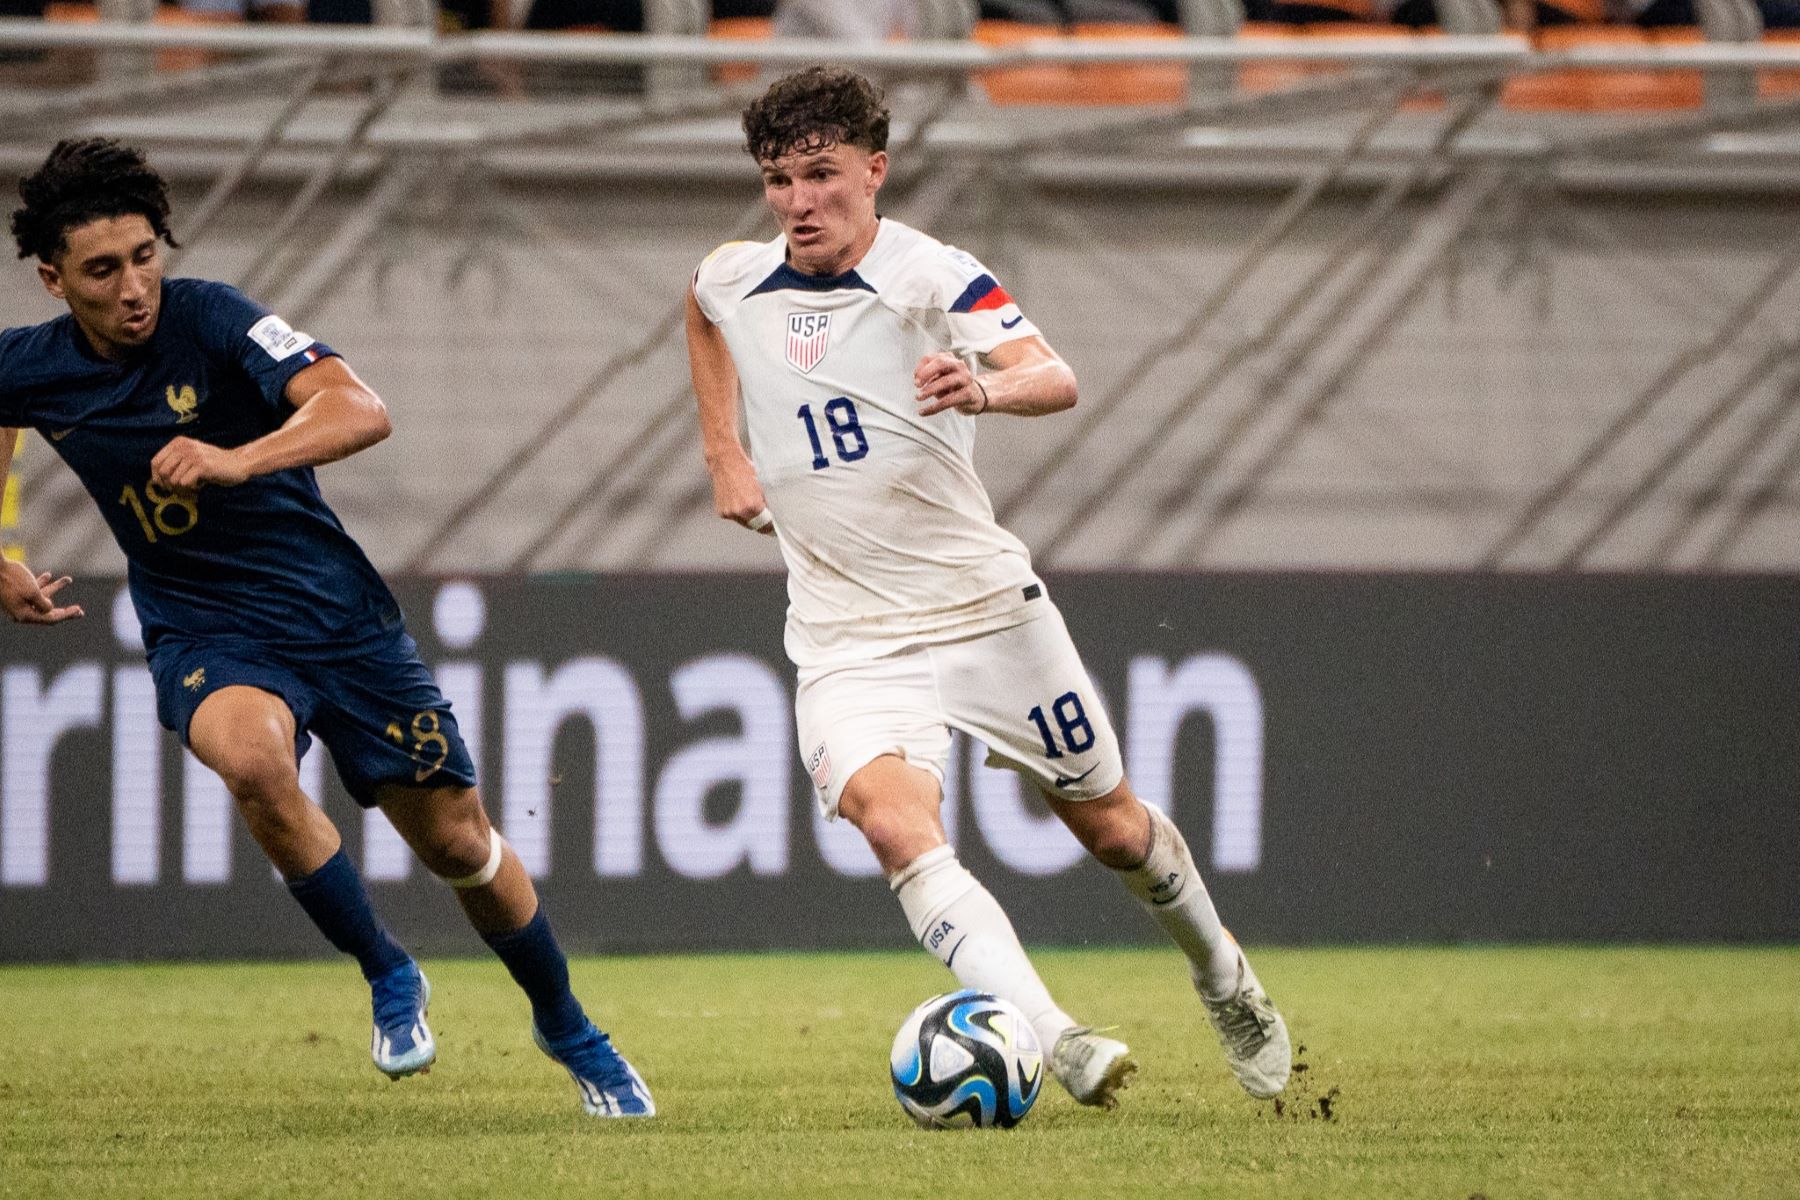 Brazil recovers to reach second round at U17 World Cup. US to face Germany  in round of 16